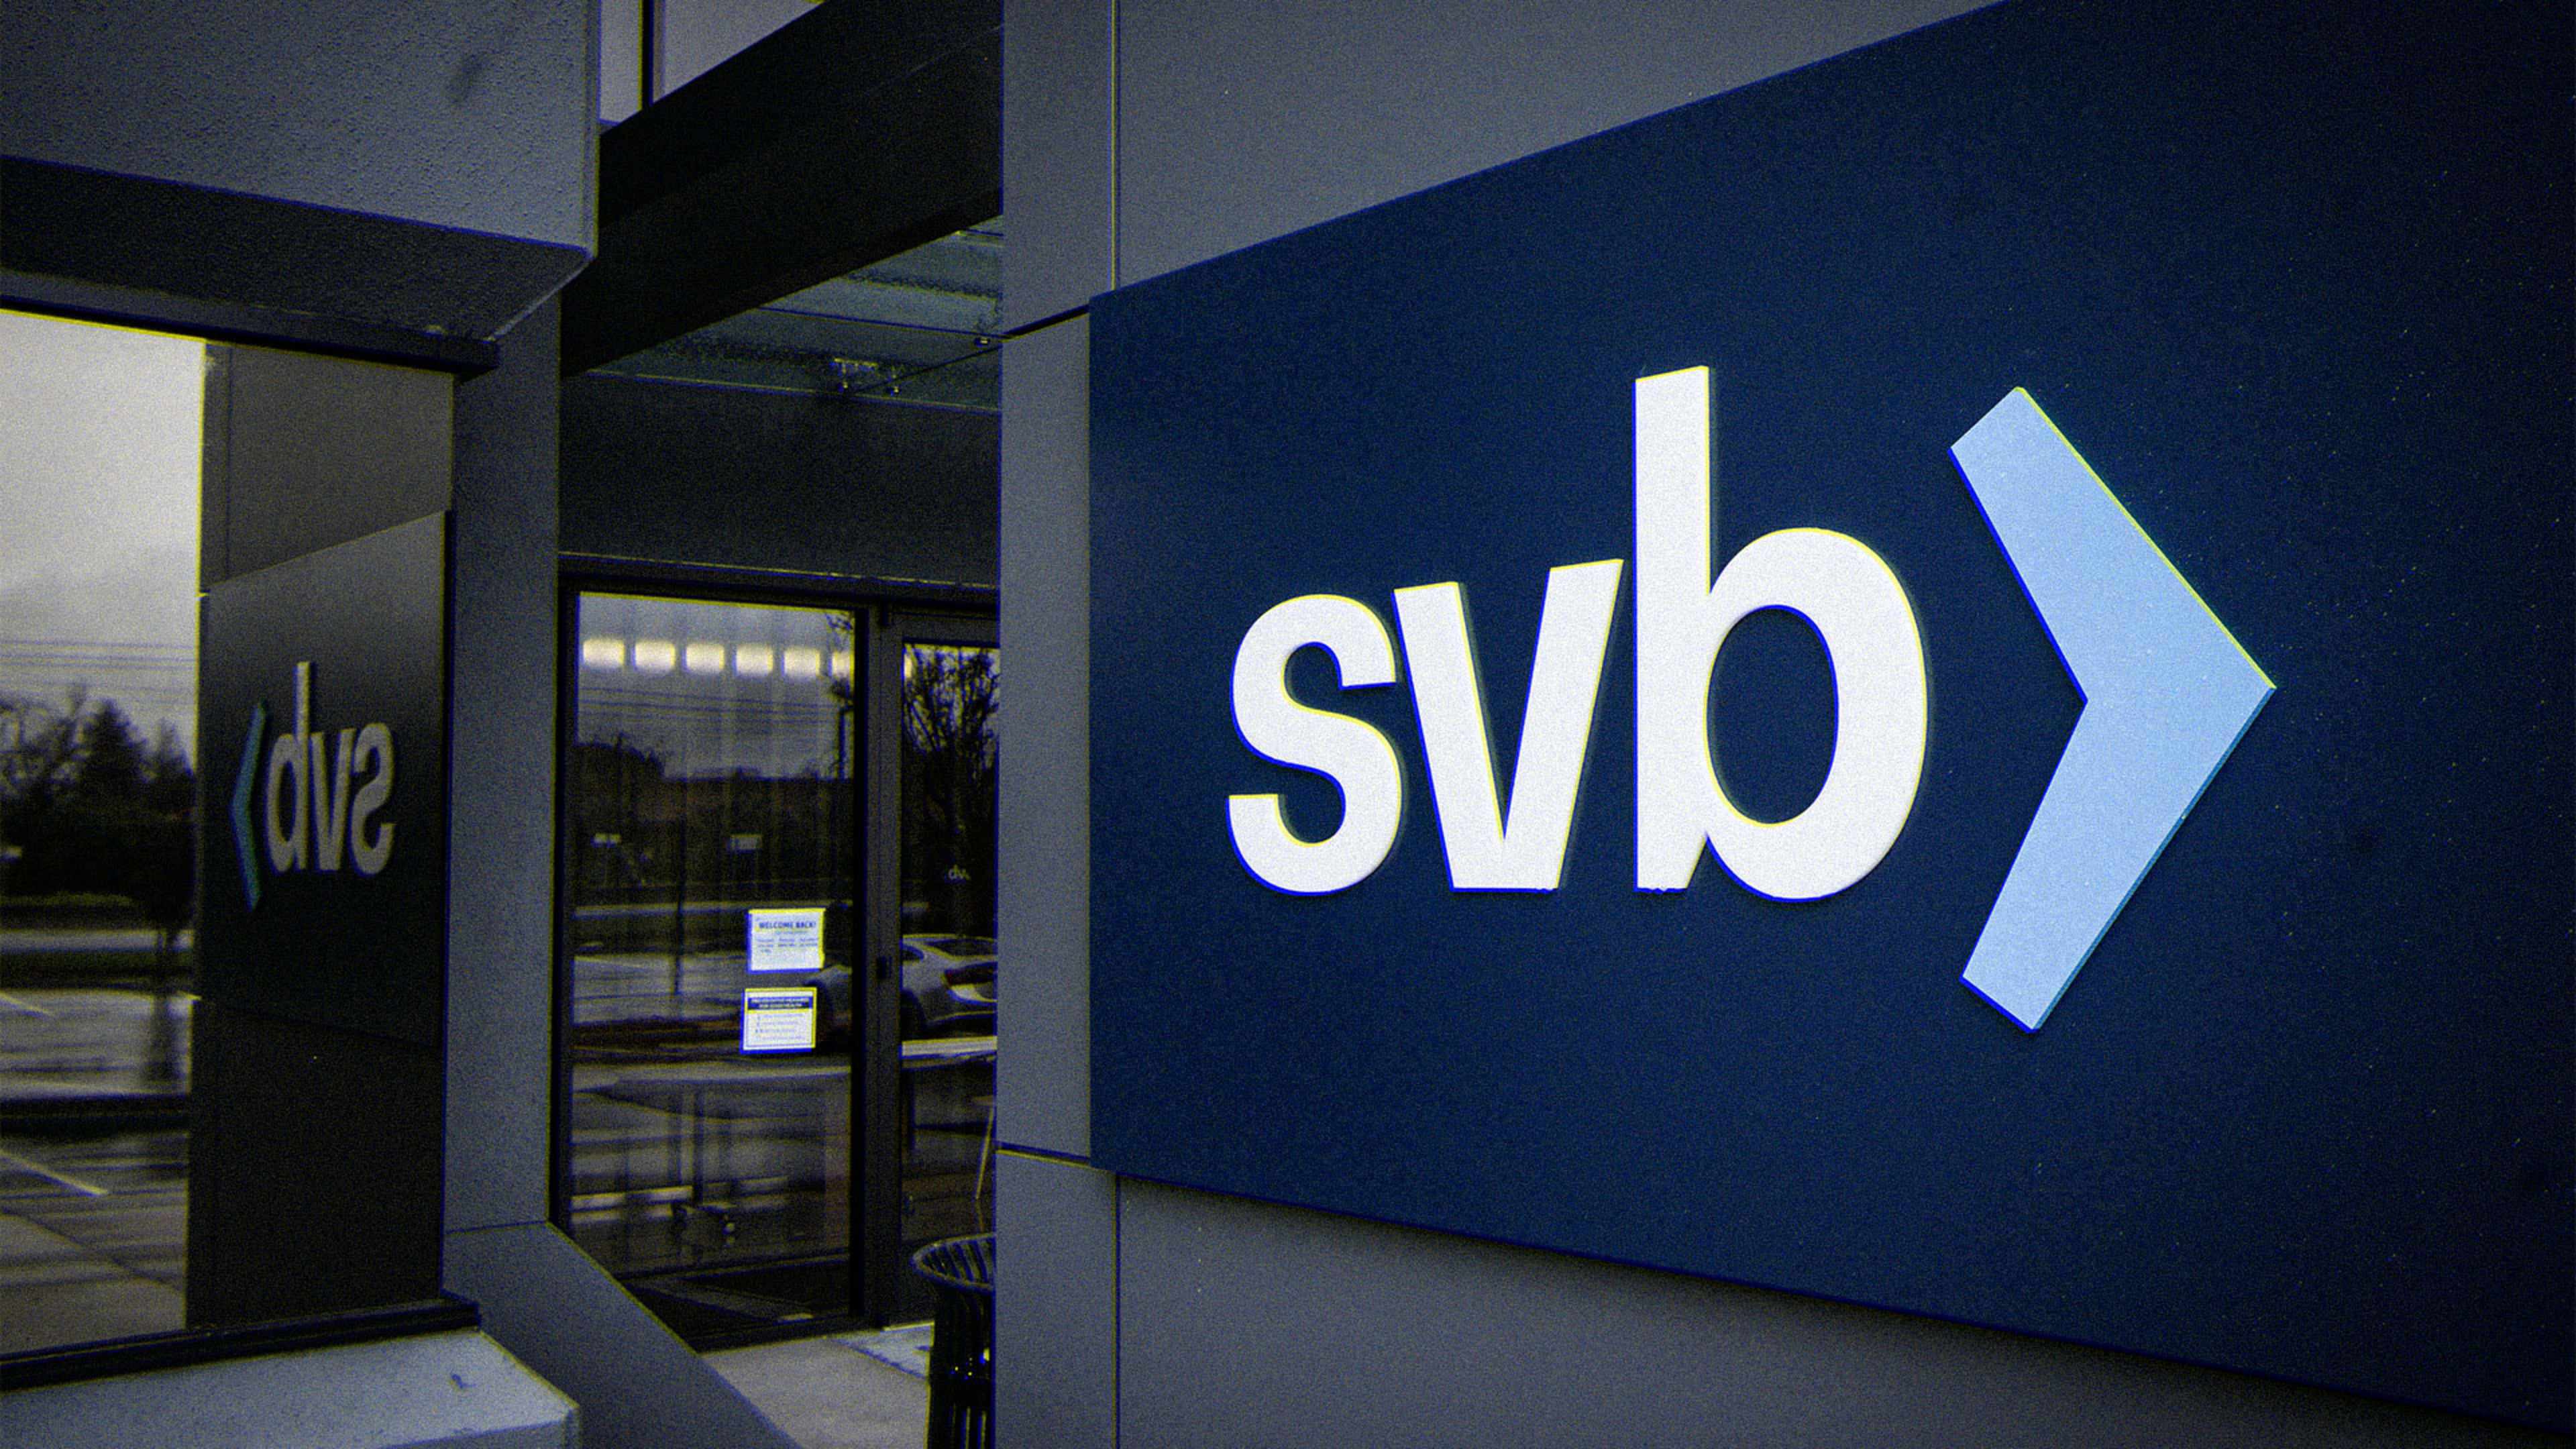 What will happen to SVB employees? Past bank failures may provide some insight